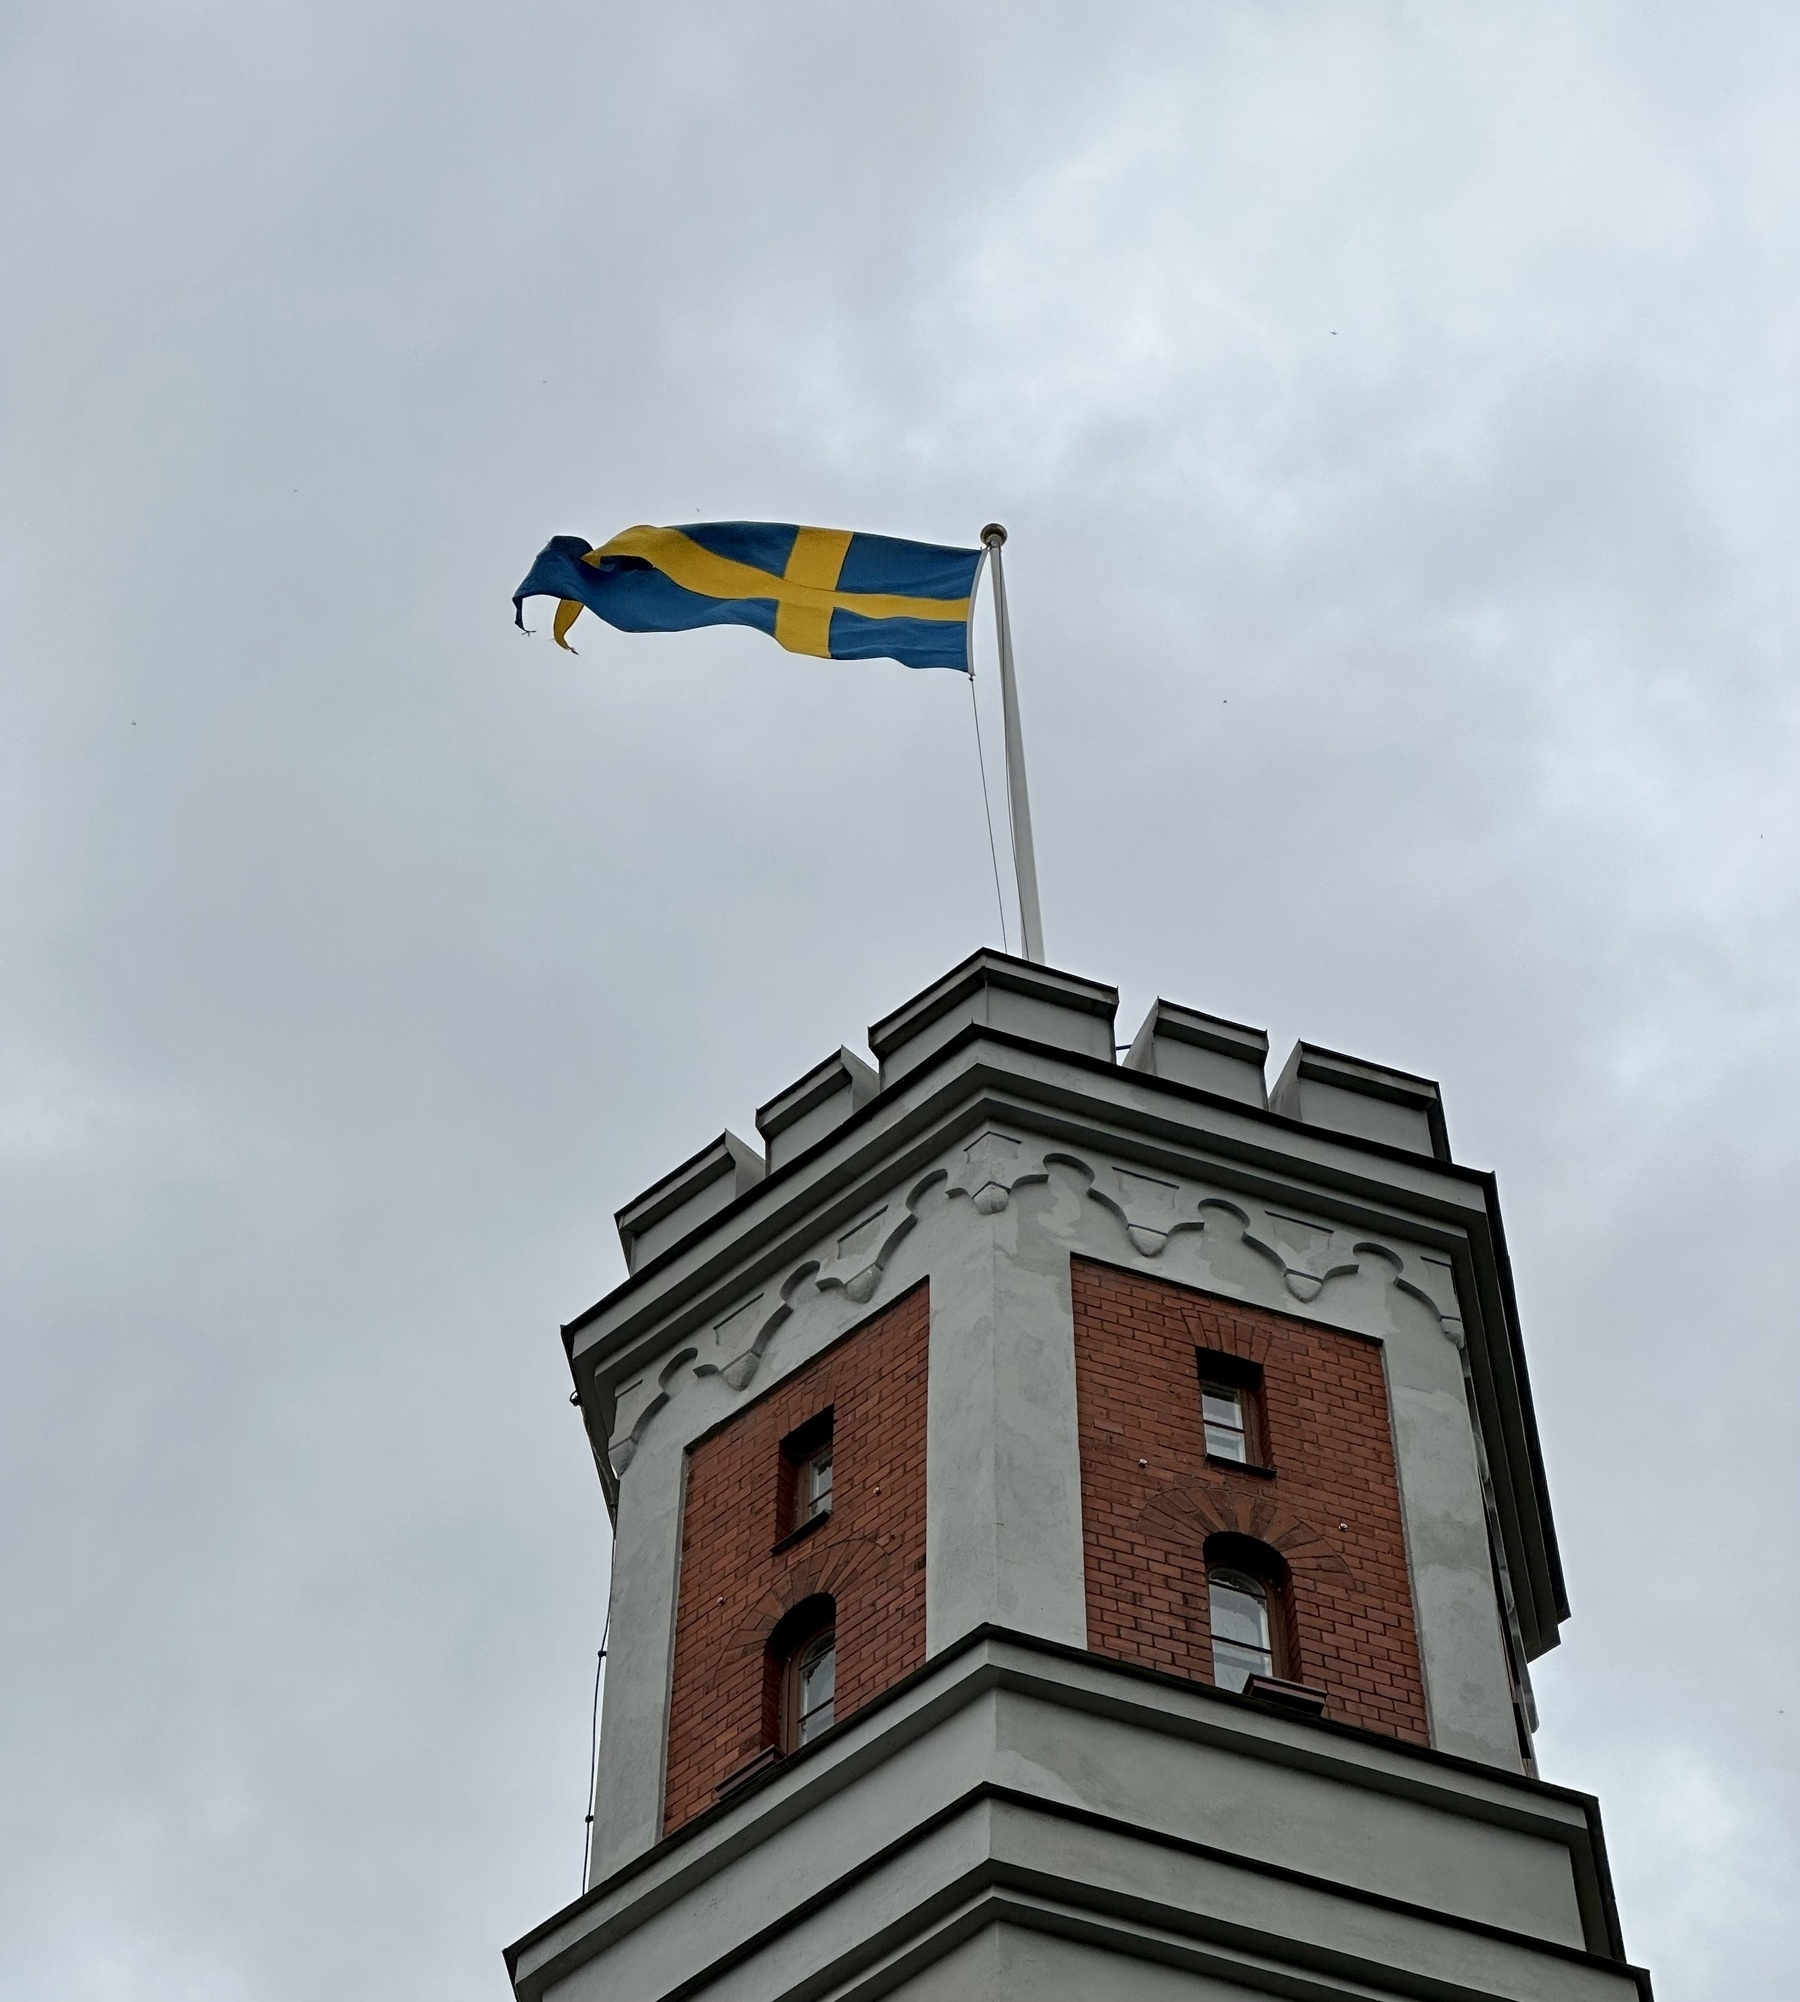 The Swedish flag flying from the top of a red brick and grey stone tower.